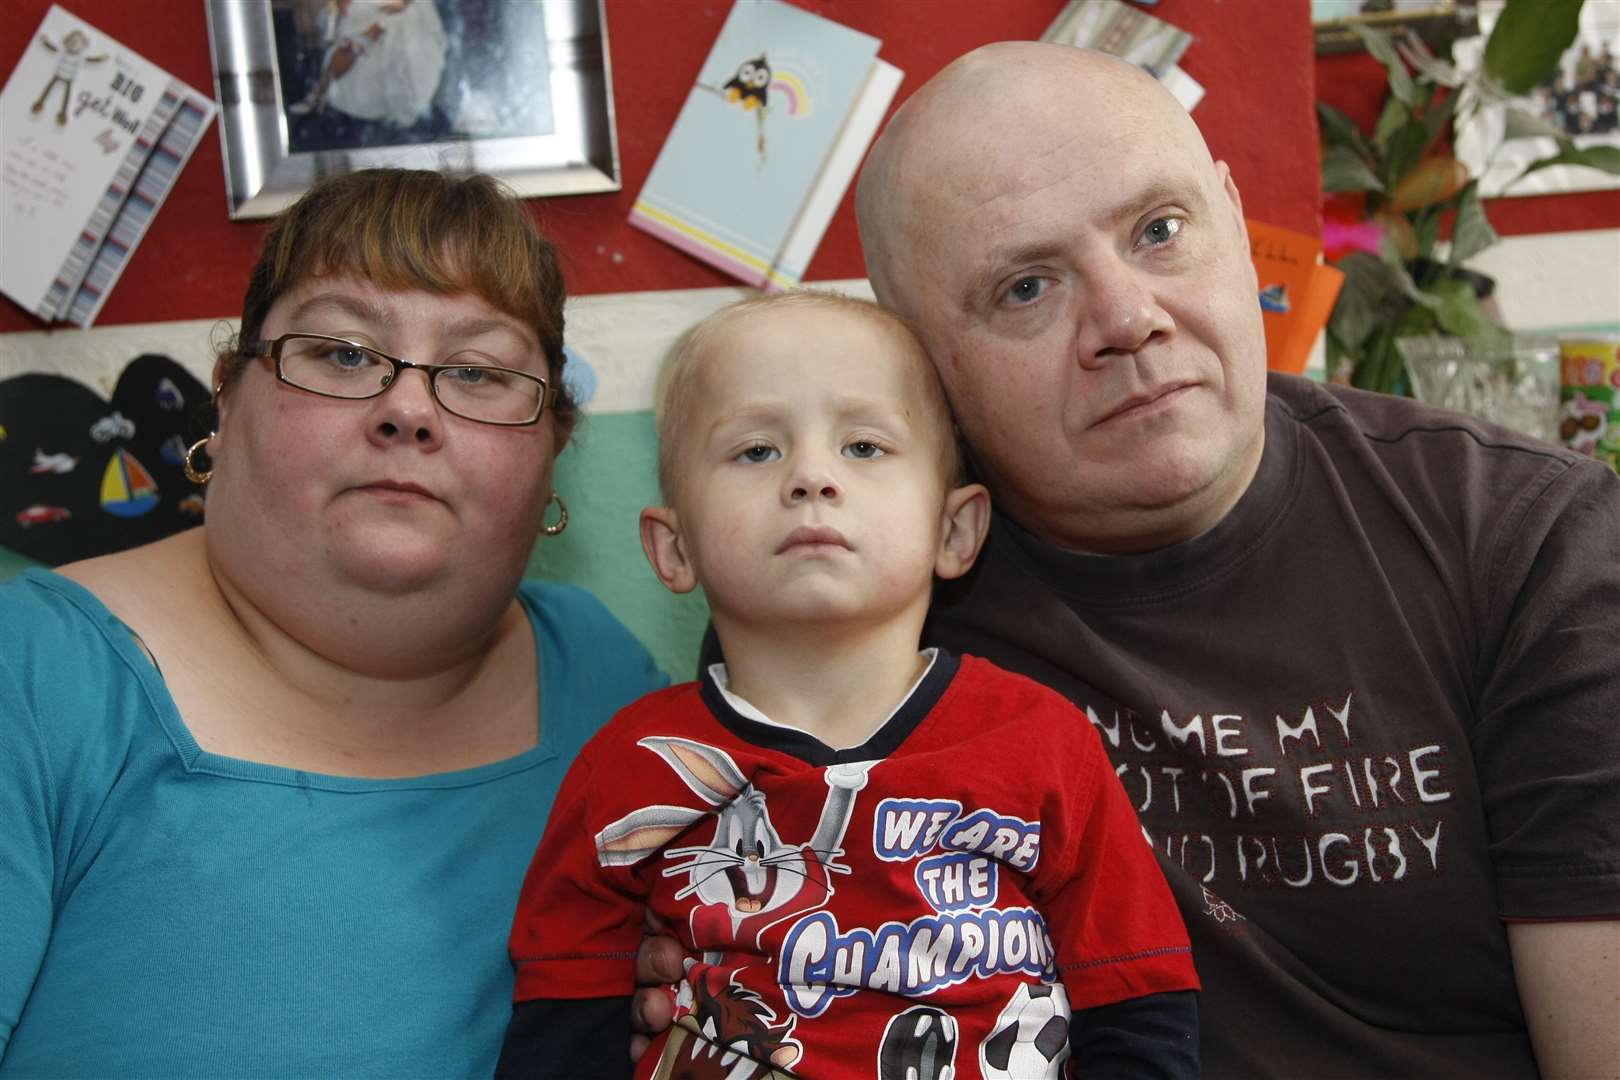 Aaron Lindridge, then aged two, with mum and dad Tracy and Mark, when we first featured their plight.